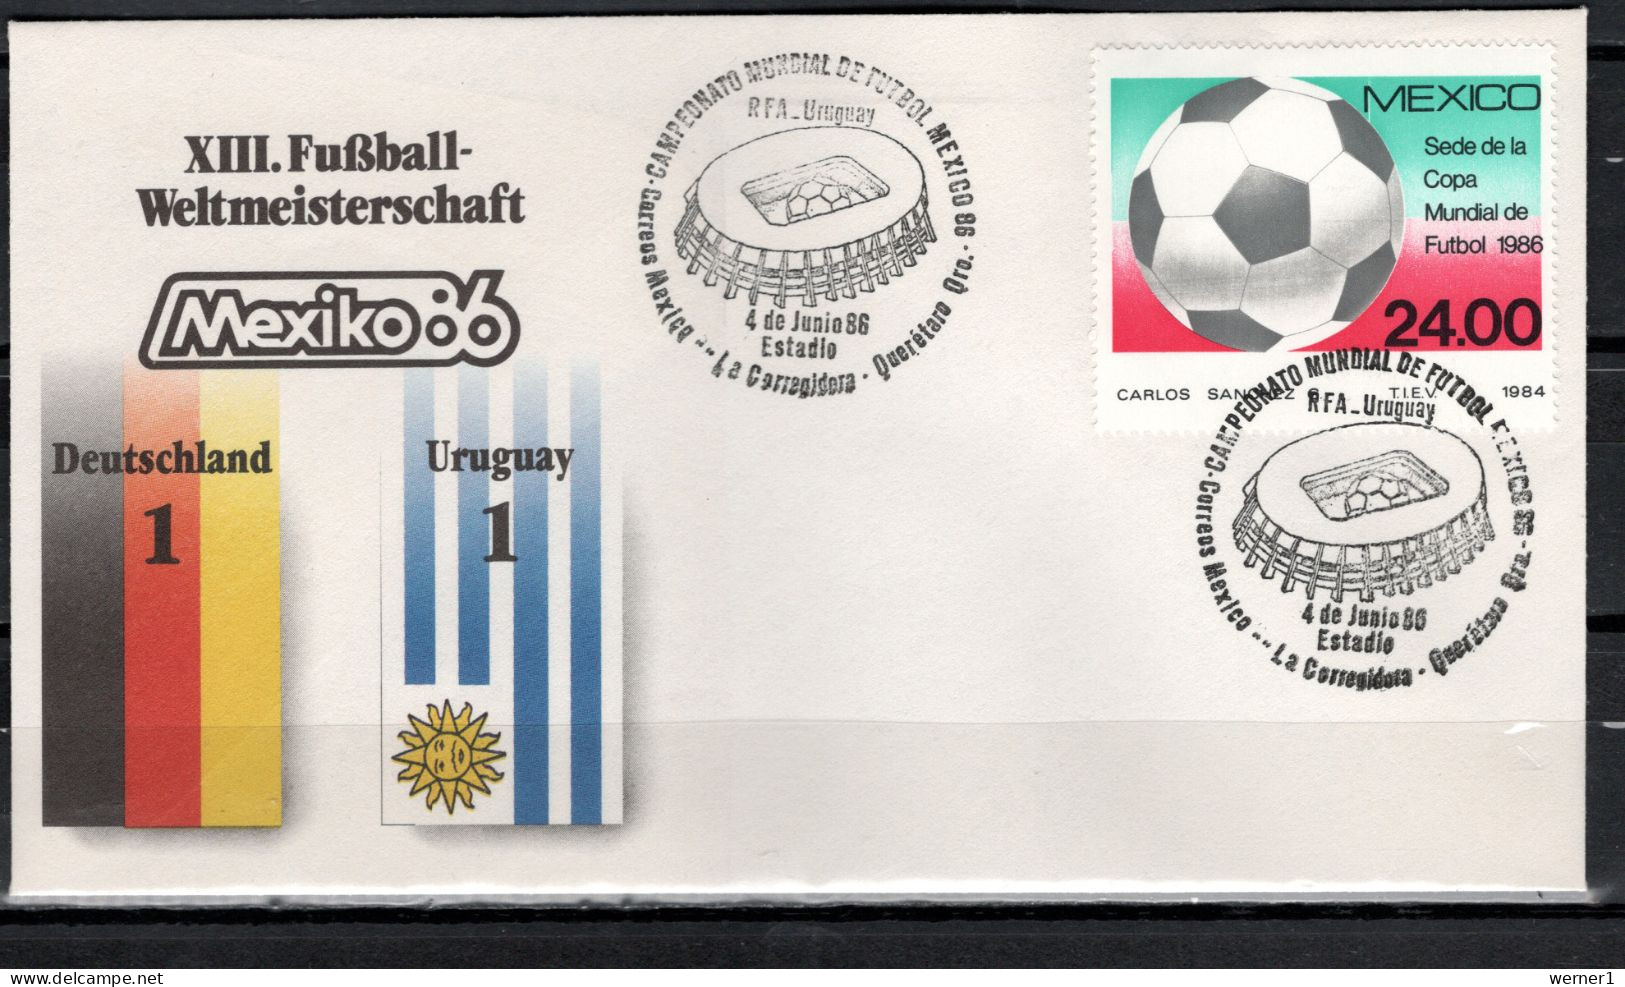 Mexico 1986 Football Soccer World Cup Commemorative Cover Match Germany - Uruguay 1 : 1 - 1986 – Mexiko